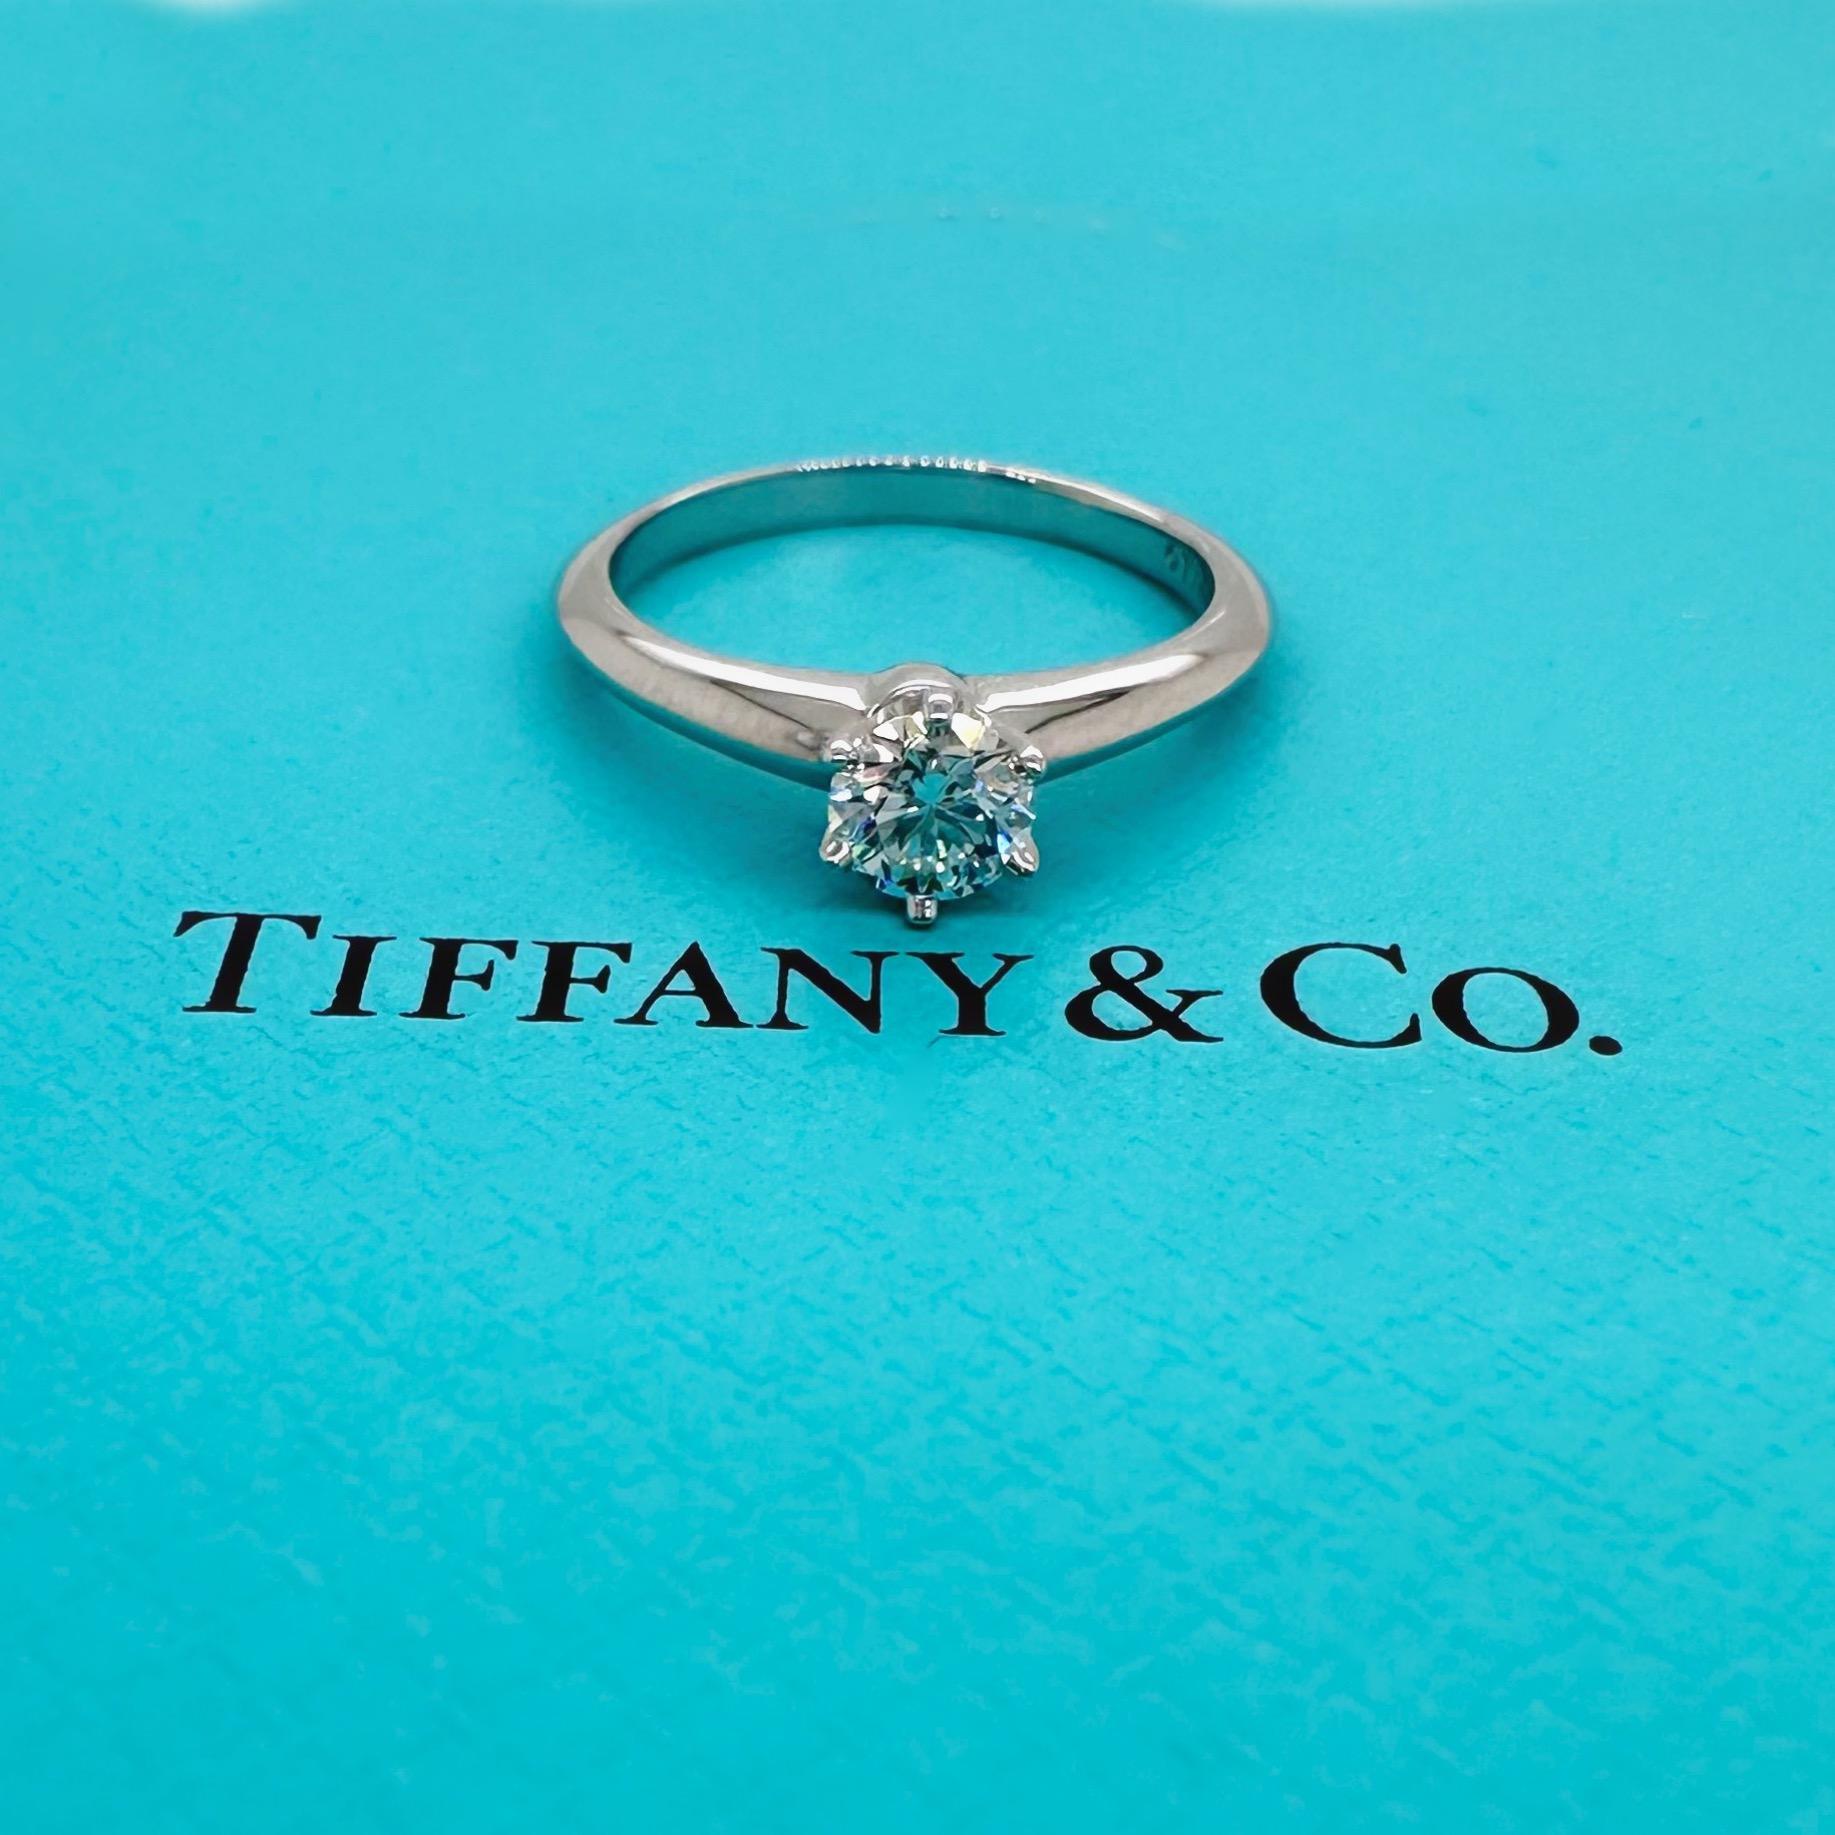 Tiffany & Co. Round Diamond 0.37 Cts F VVS1 Solitaire Engagement Ring Platinum For Sale 7